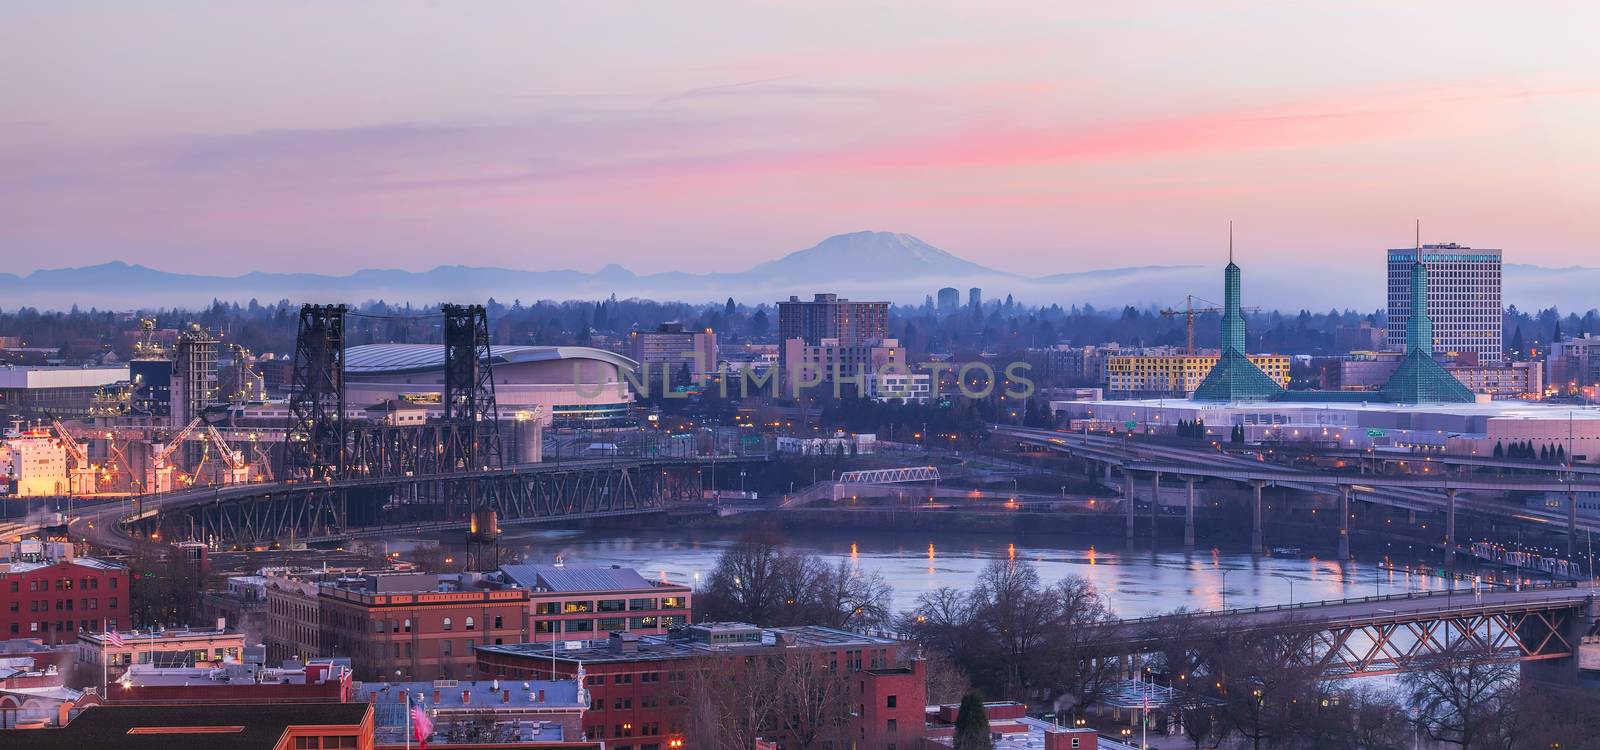 Portland Oregon Cityscape at Sunrise with Mt St Helens View along Willamette River Panorama